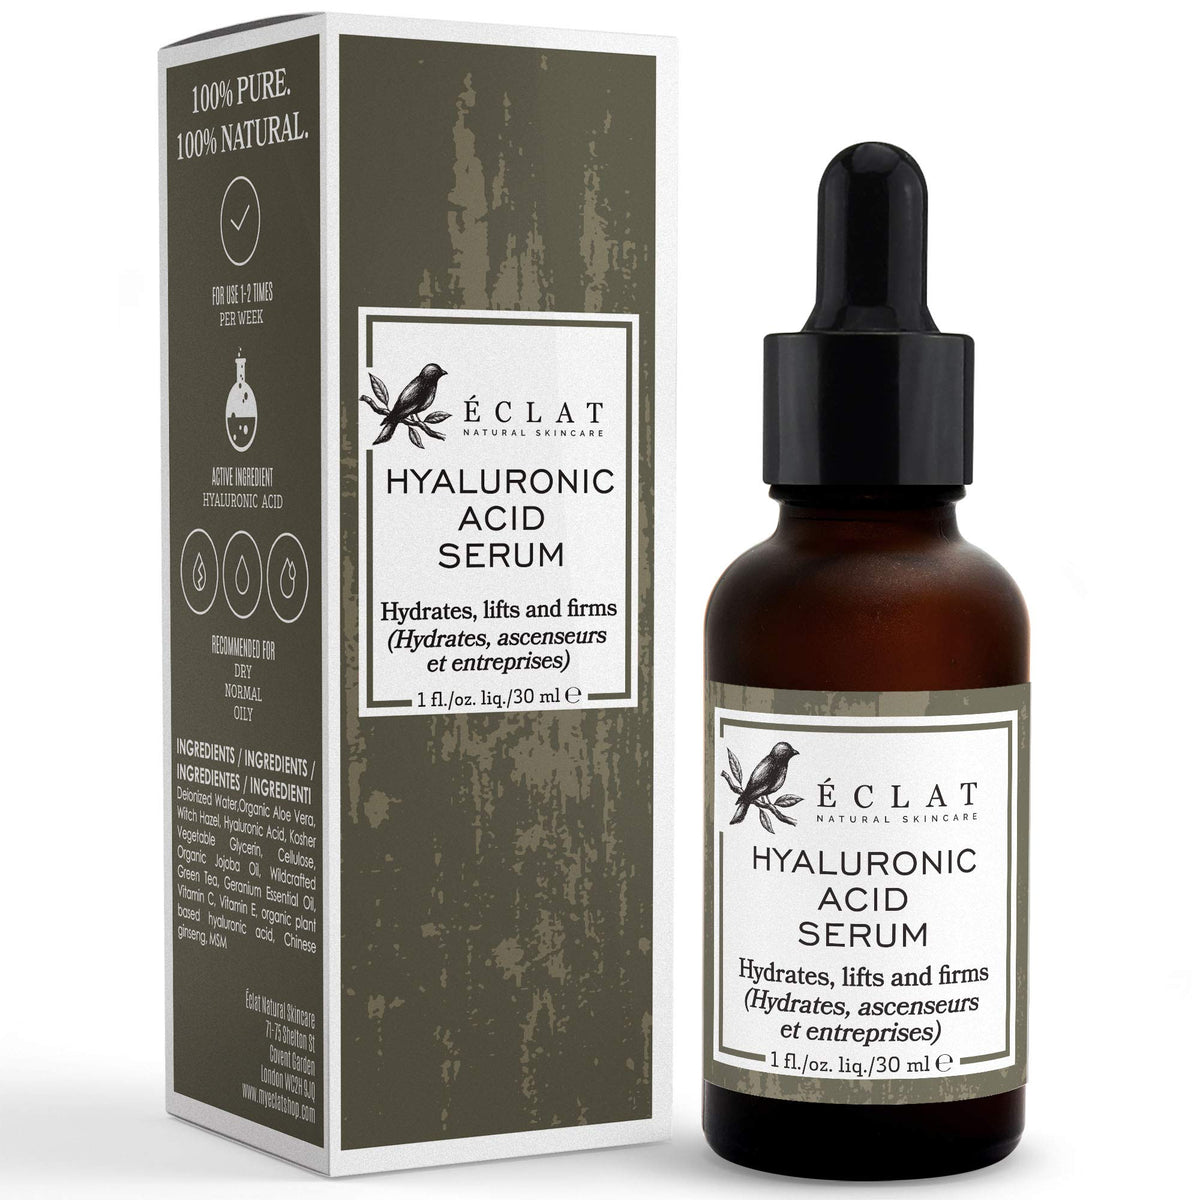 Hyaluronic Acid Serum for Face - 2.5% Hyaluronic Acid + 3% B5 with Vitamin C & E, Aloe Vera, Facial Serum for Anti Aging and Anti Wrinkle, Hydrating Serum, Face Serum for All Skin Type